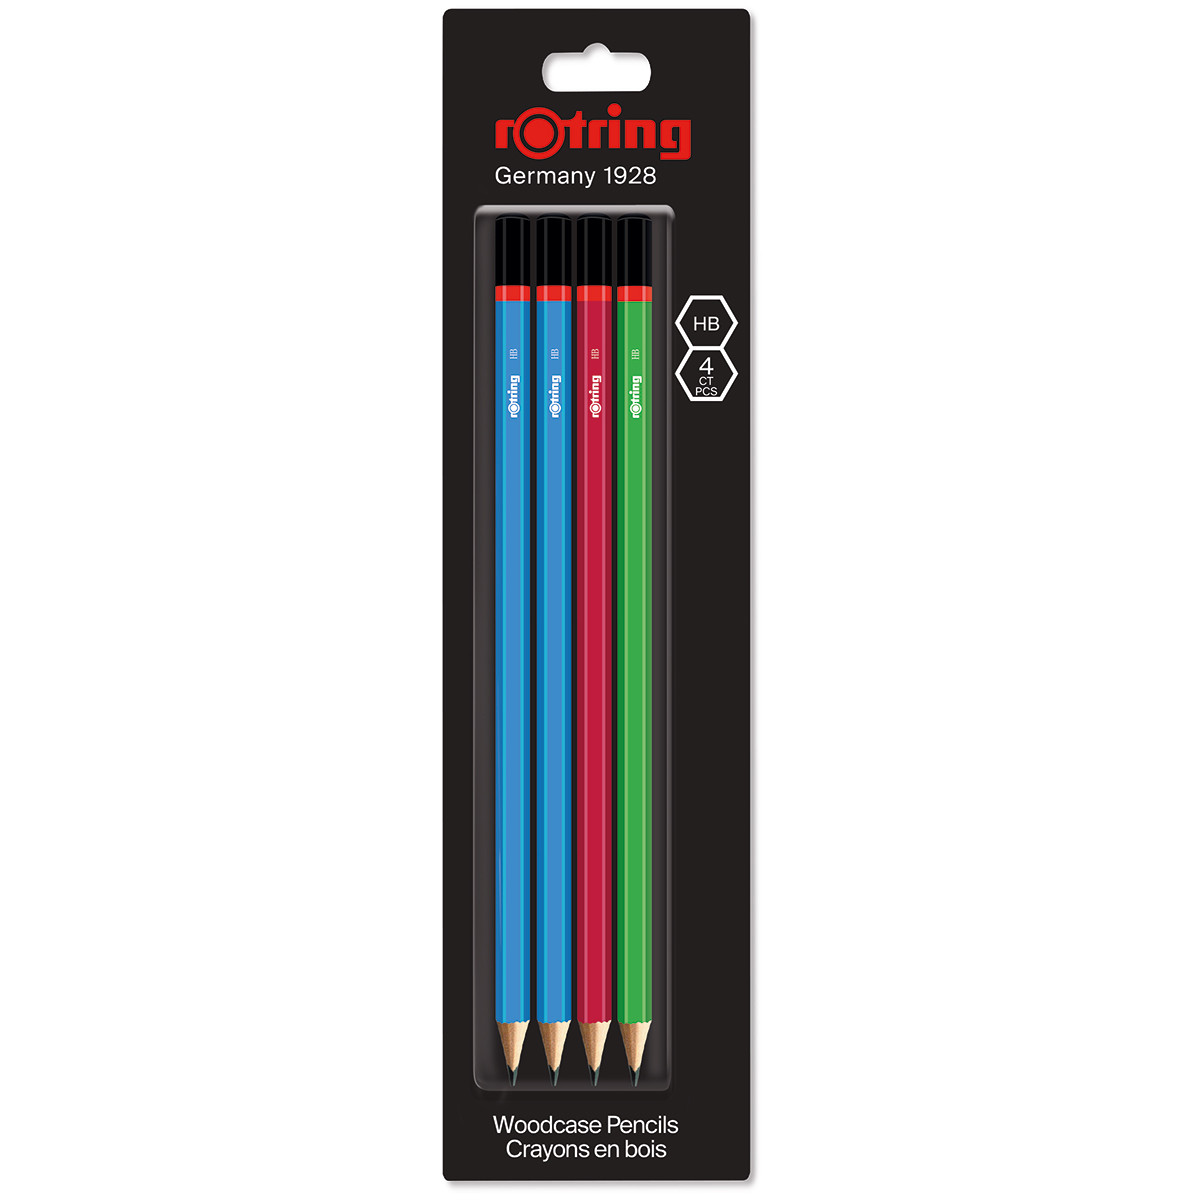 Rotring Woodcase pencil - Assorted Colours - HB (Blister of 4)